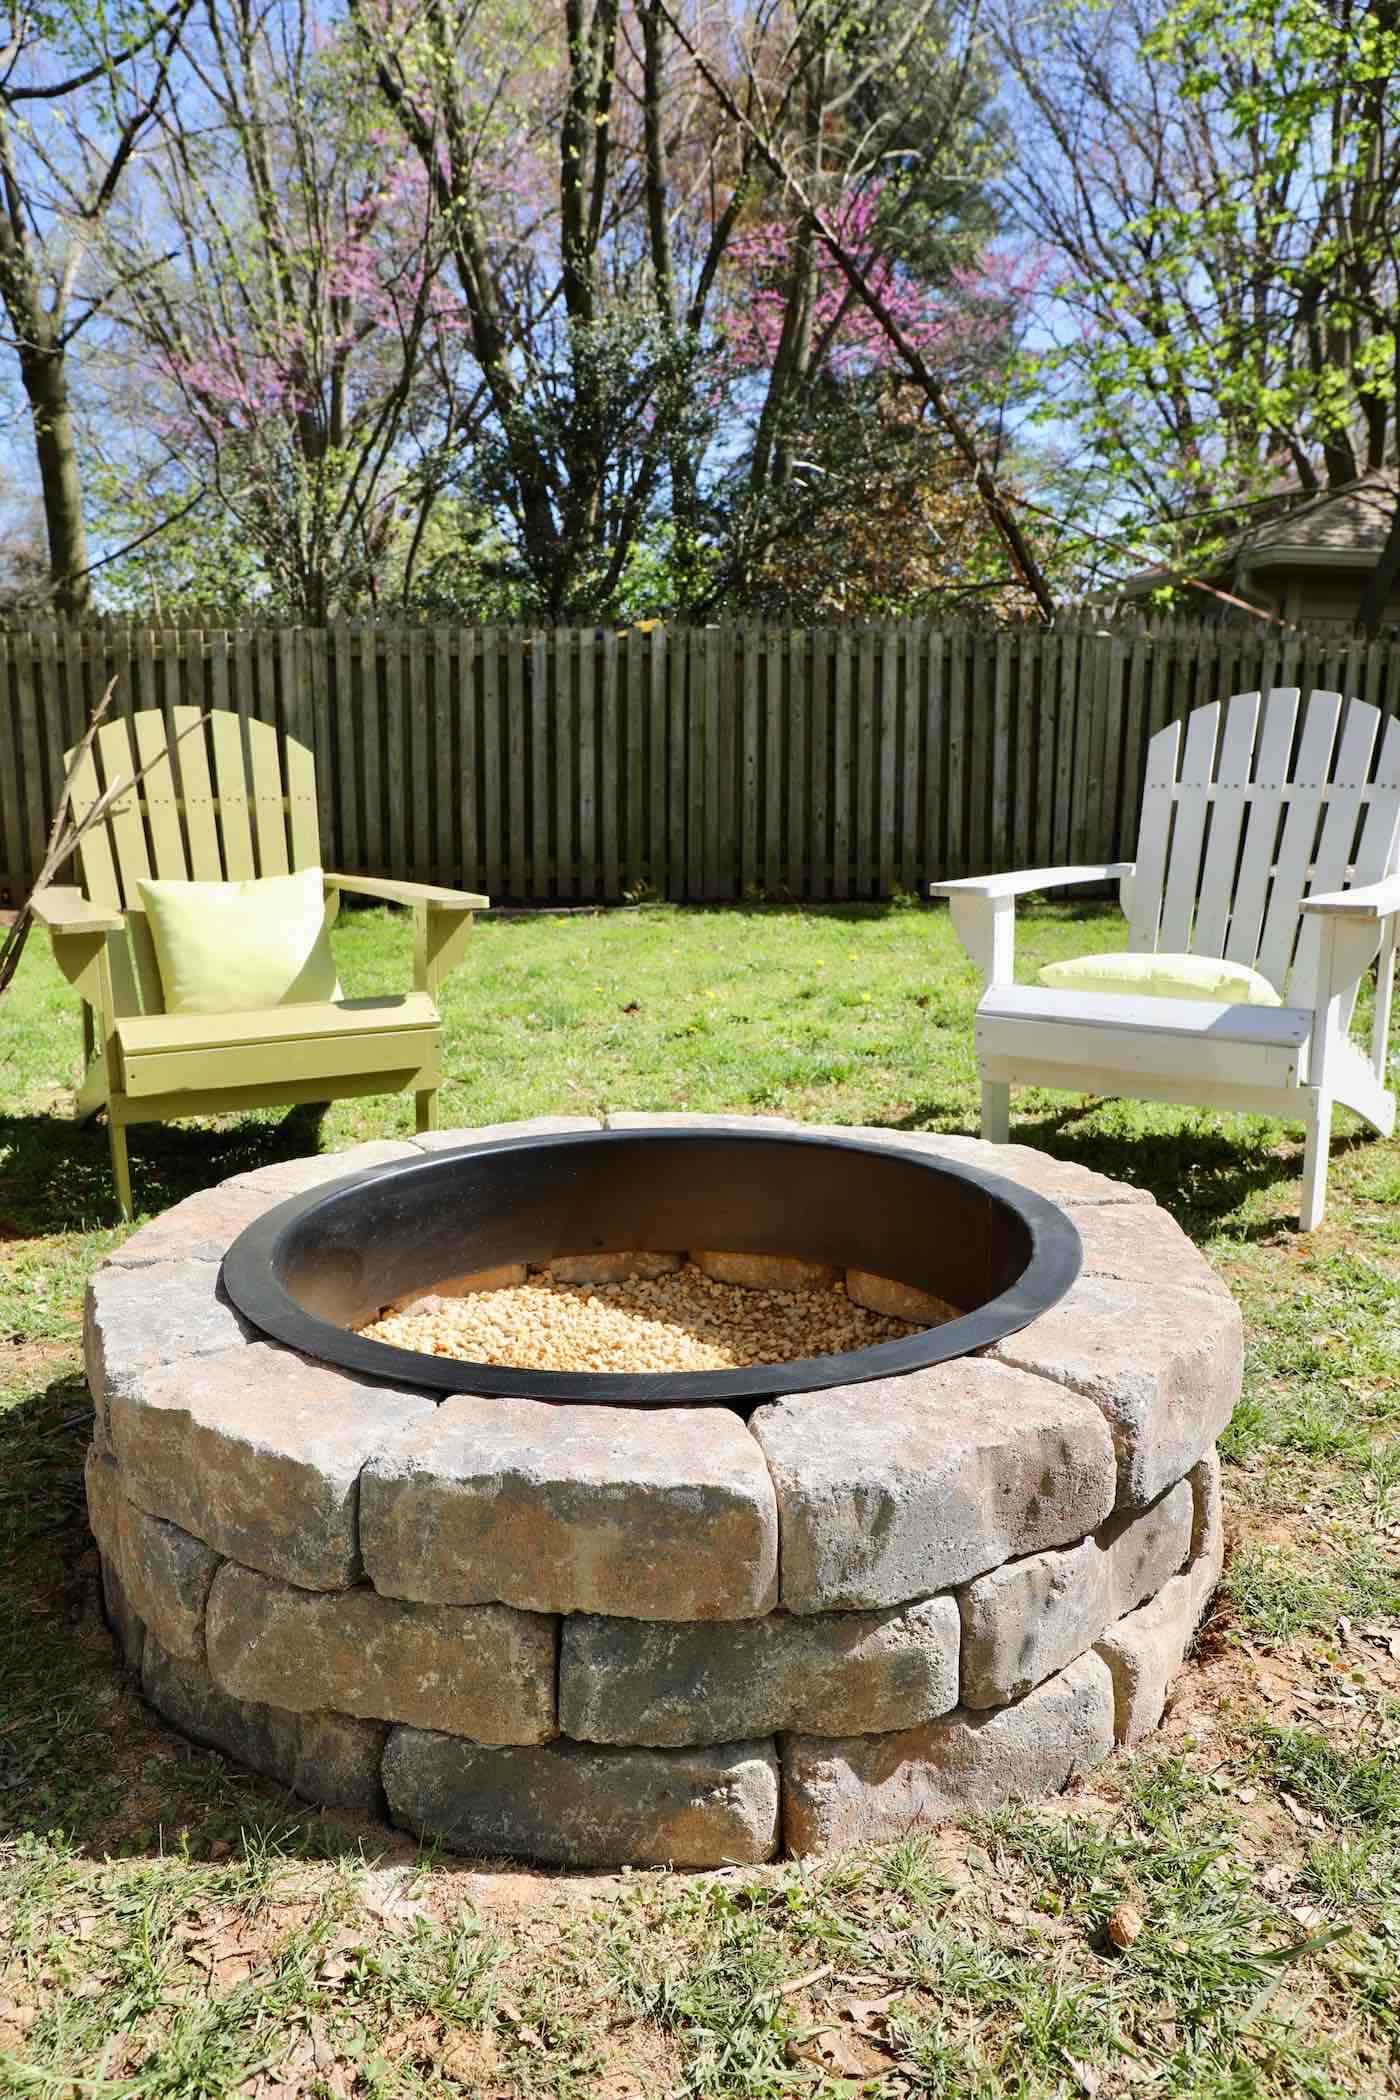 Diy Fire Pit With Gravel Stones, How To Build An Outdoor In Ground Fire Pit